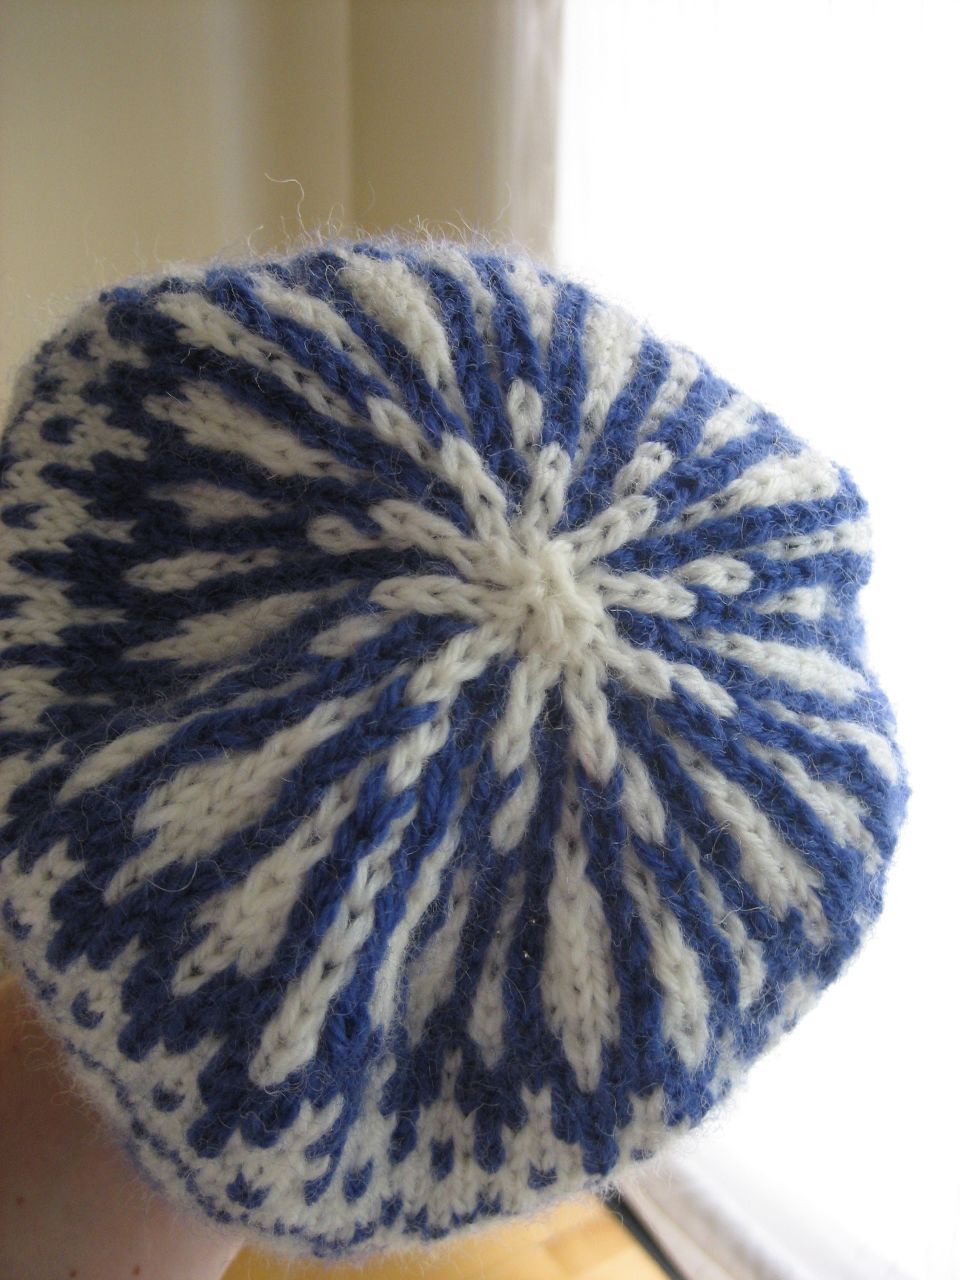 Jan's hat: my first color project